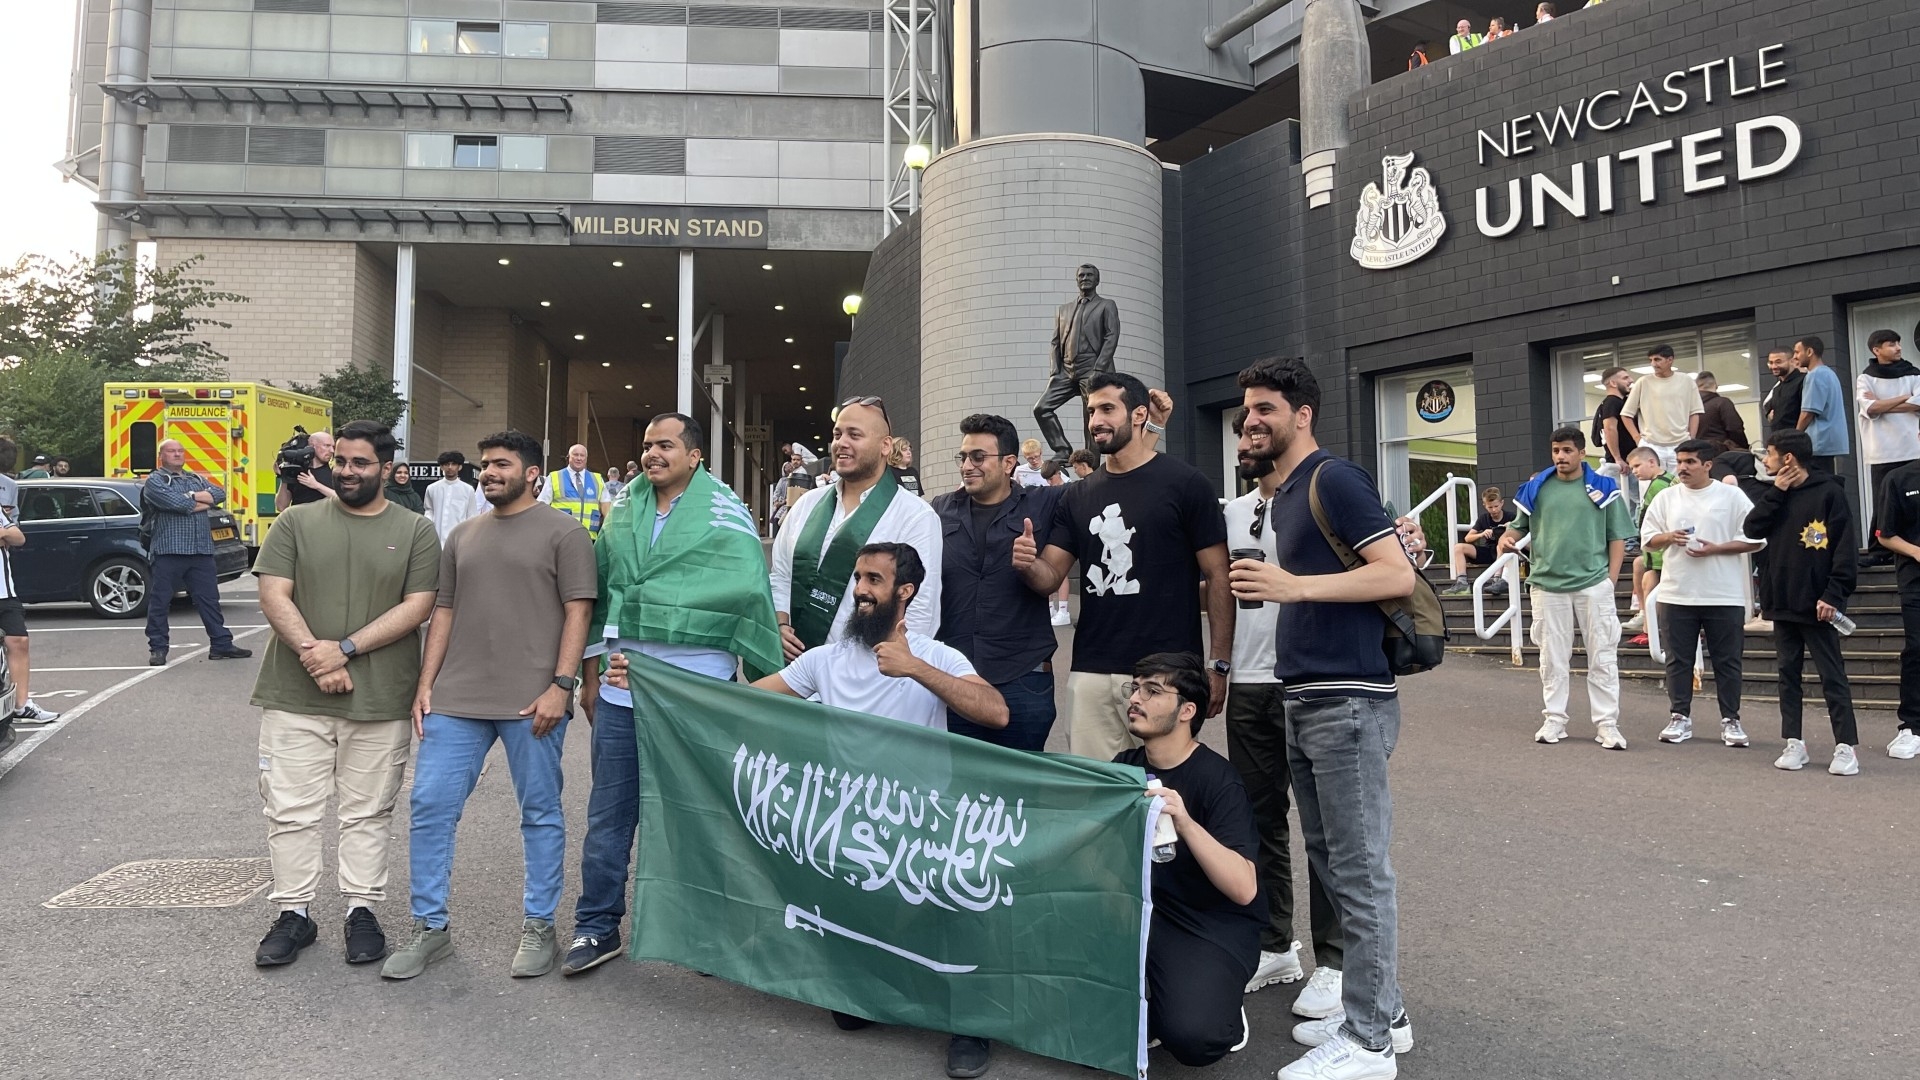 Saudi football fans pose ahead of the international friendly football match between Saudi Arabia and Costa Rica at St James' Park in Newcastle, England, on 8 September 2023 (MEE/Rayhan Uddin)